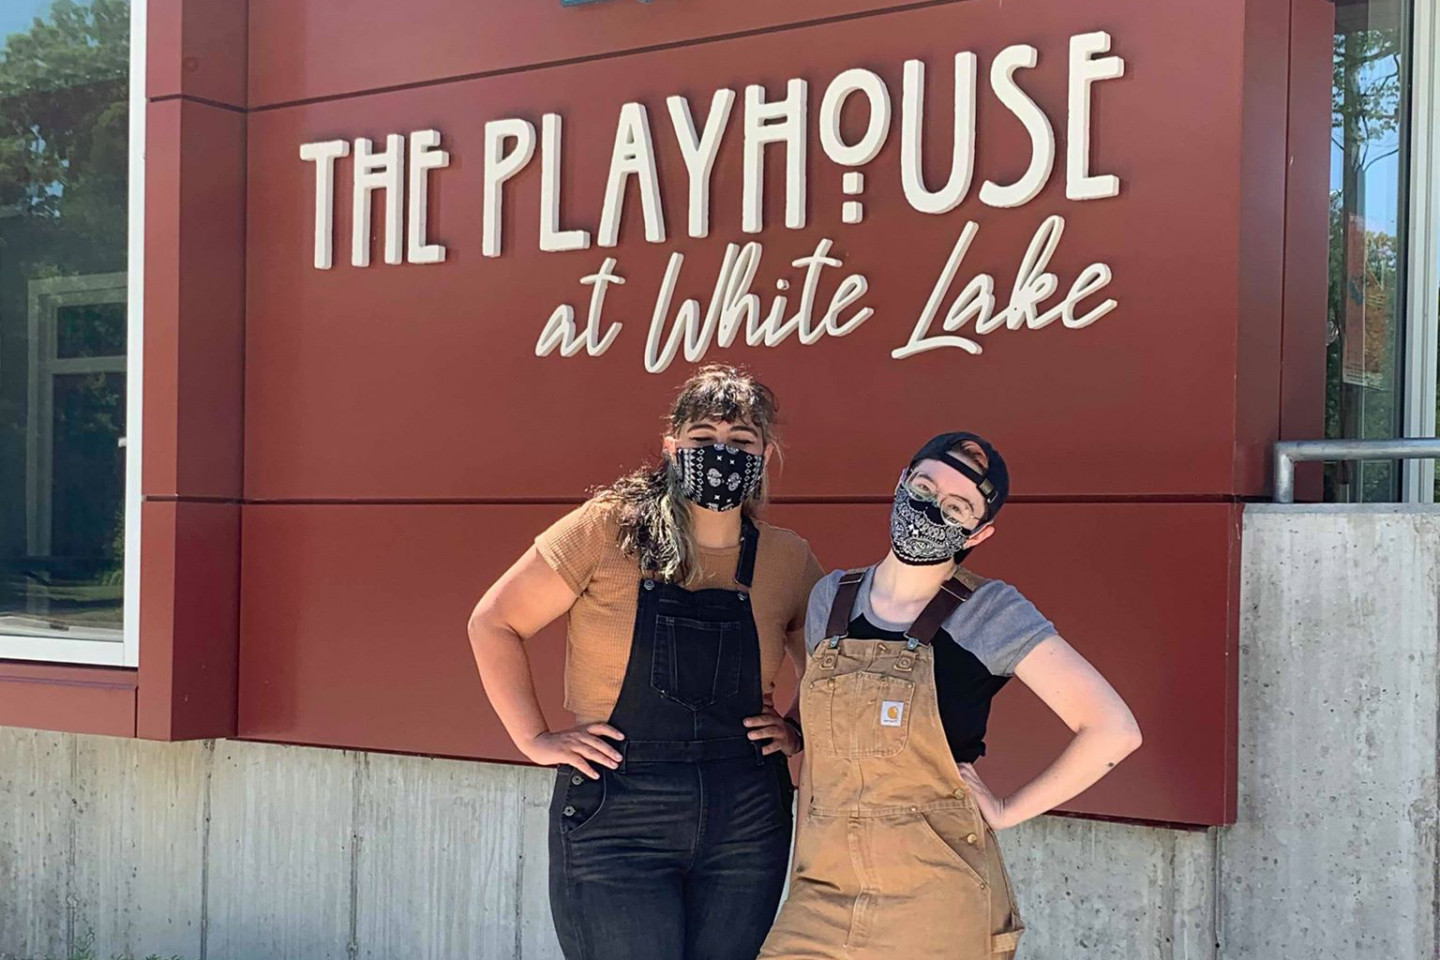 Caroline Arana and Claire Beaman stand together in front of the Playhouse at White Lake sign.